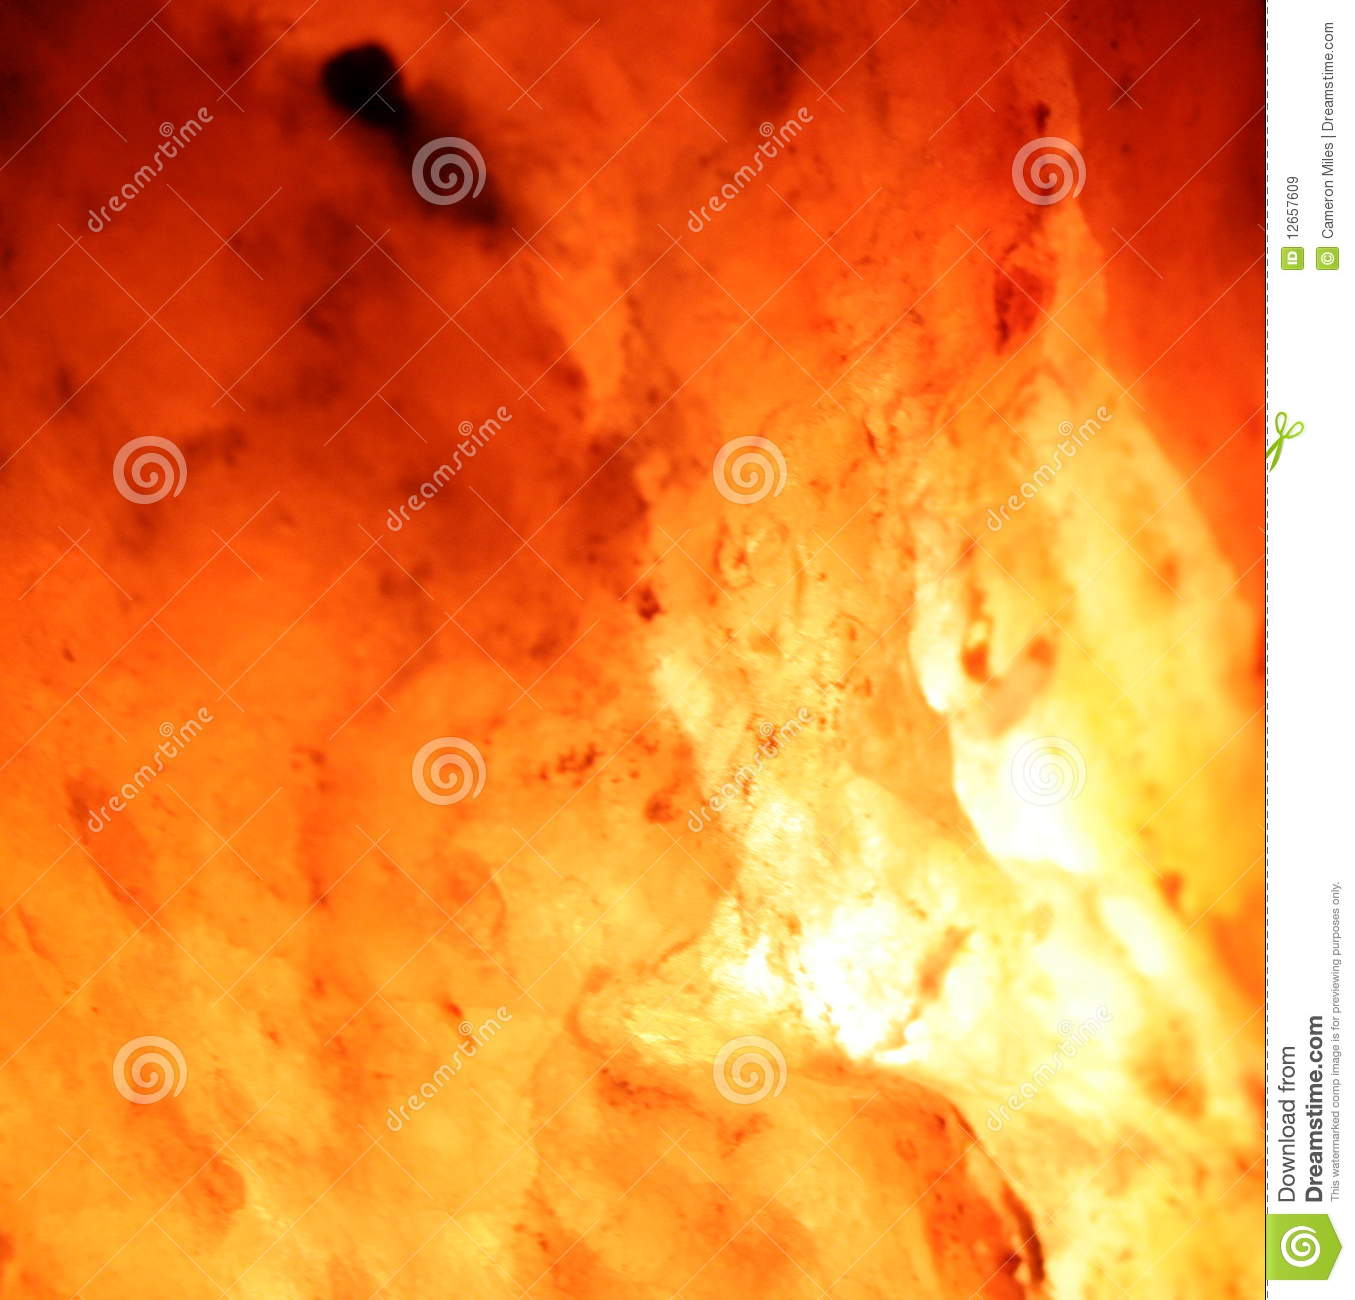 Lava Flow Royalty Free Stock Images   Image  12657609